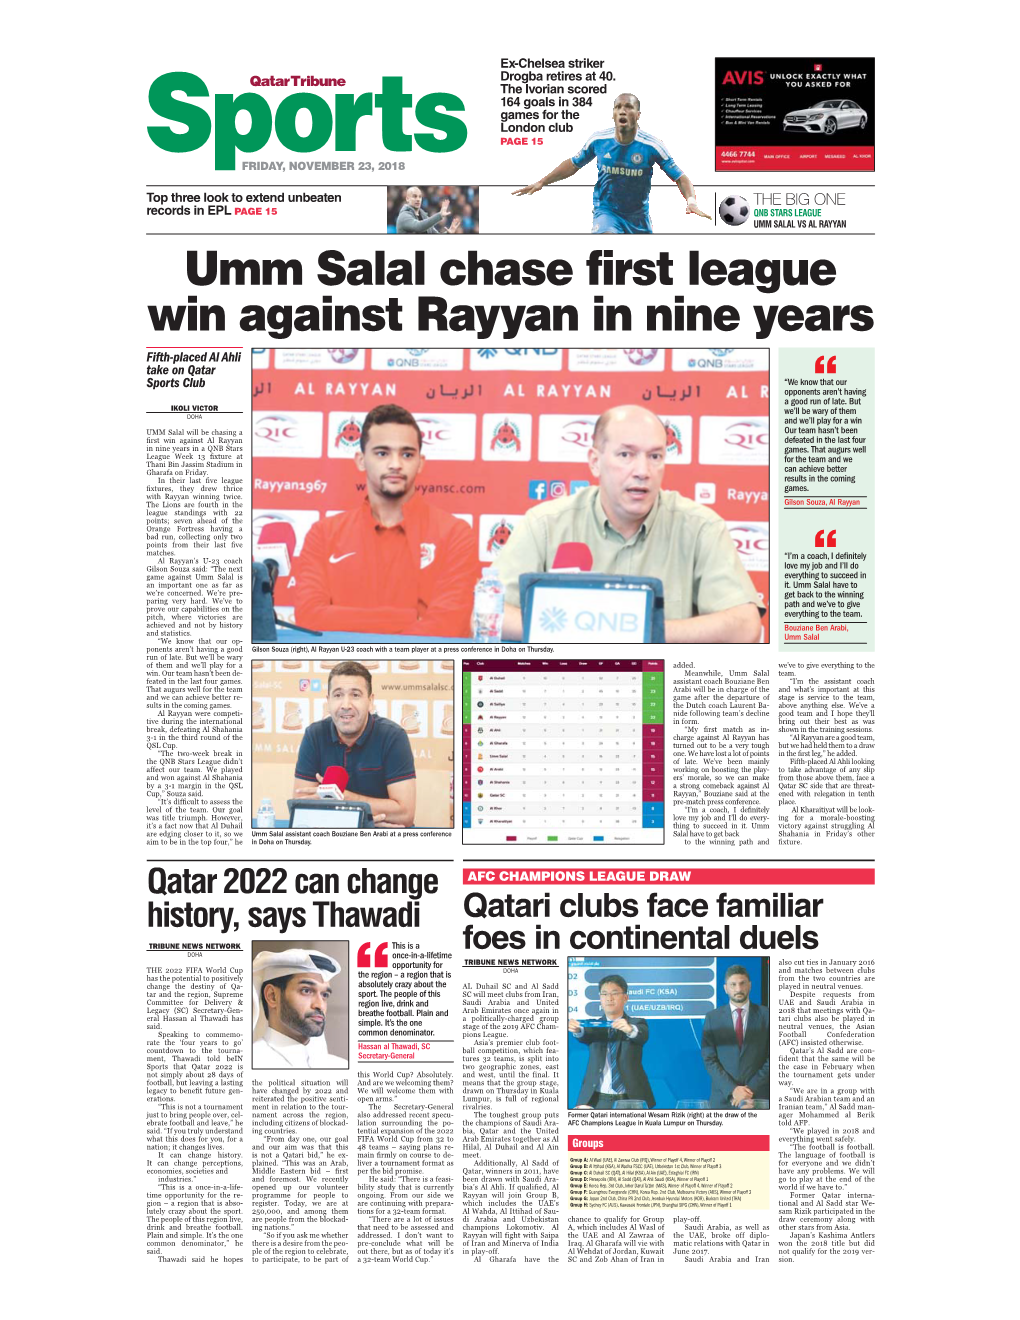 Umm Salal Chase First League Win Against Rayyan in Nine Years